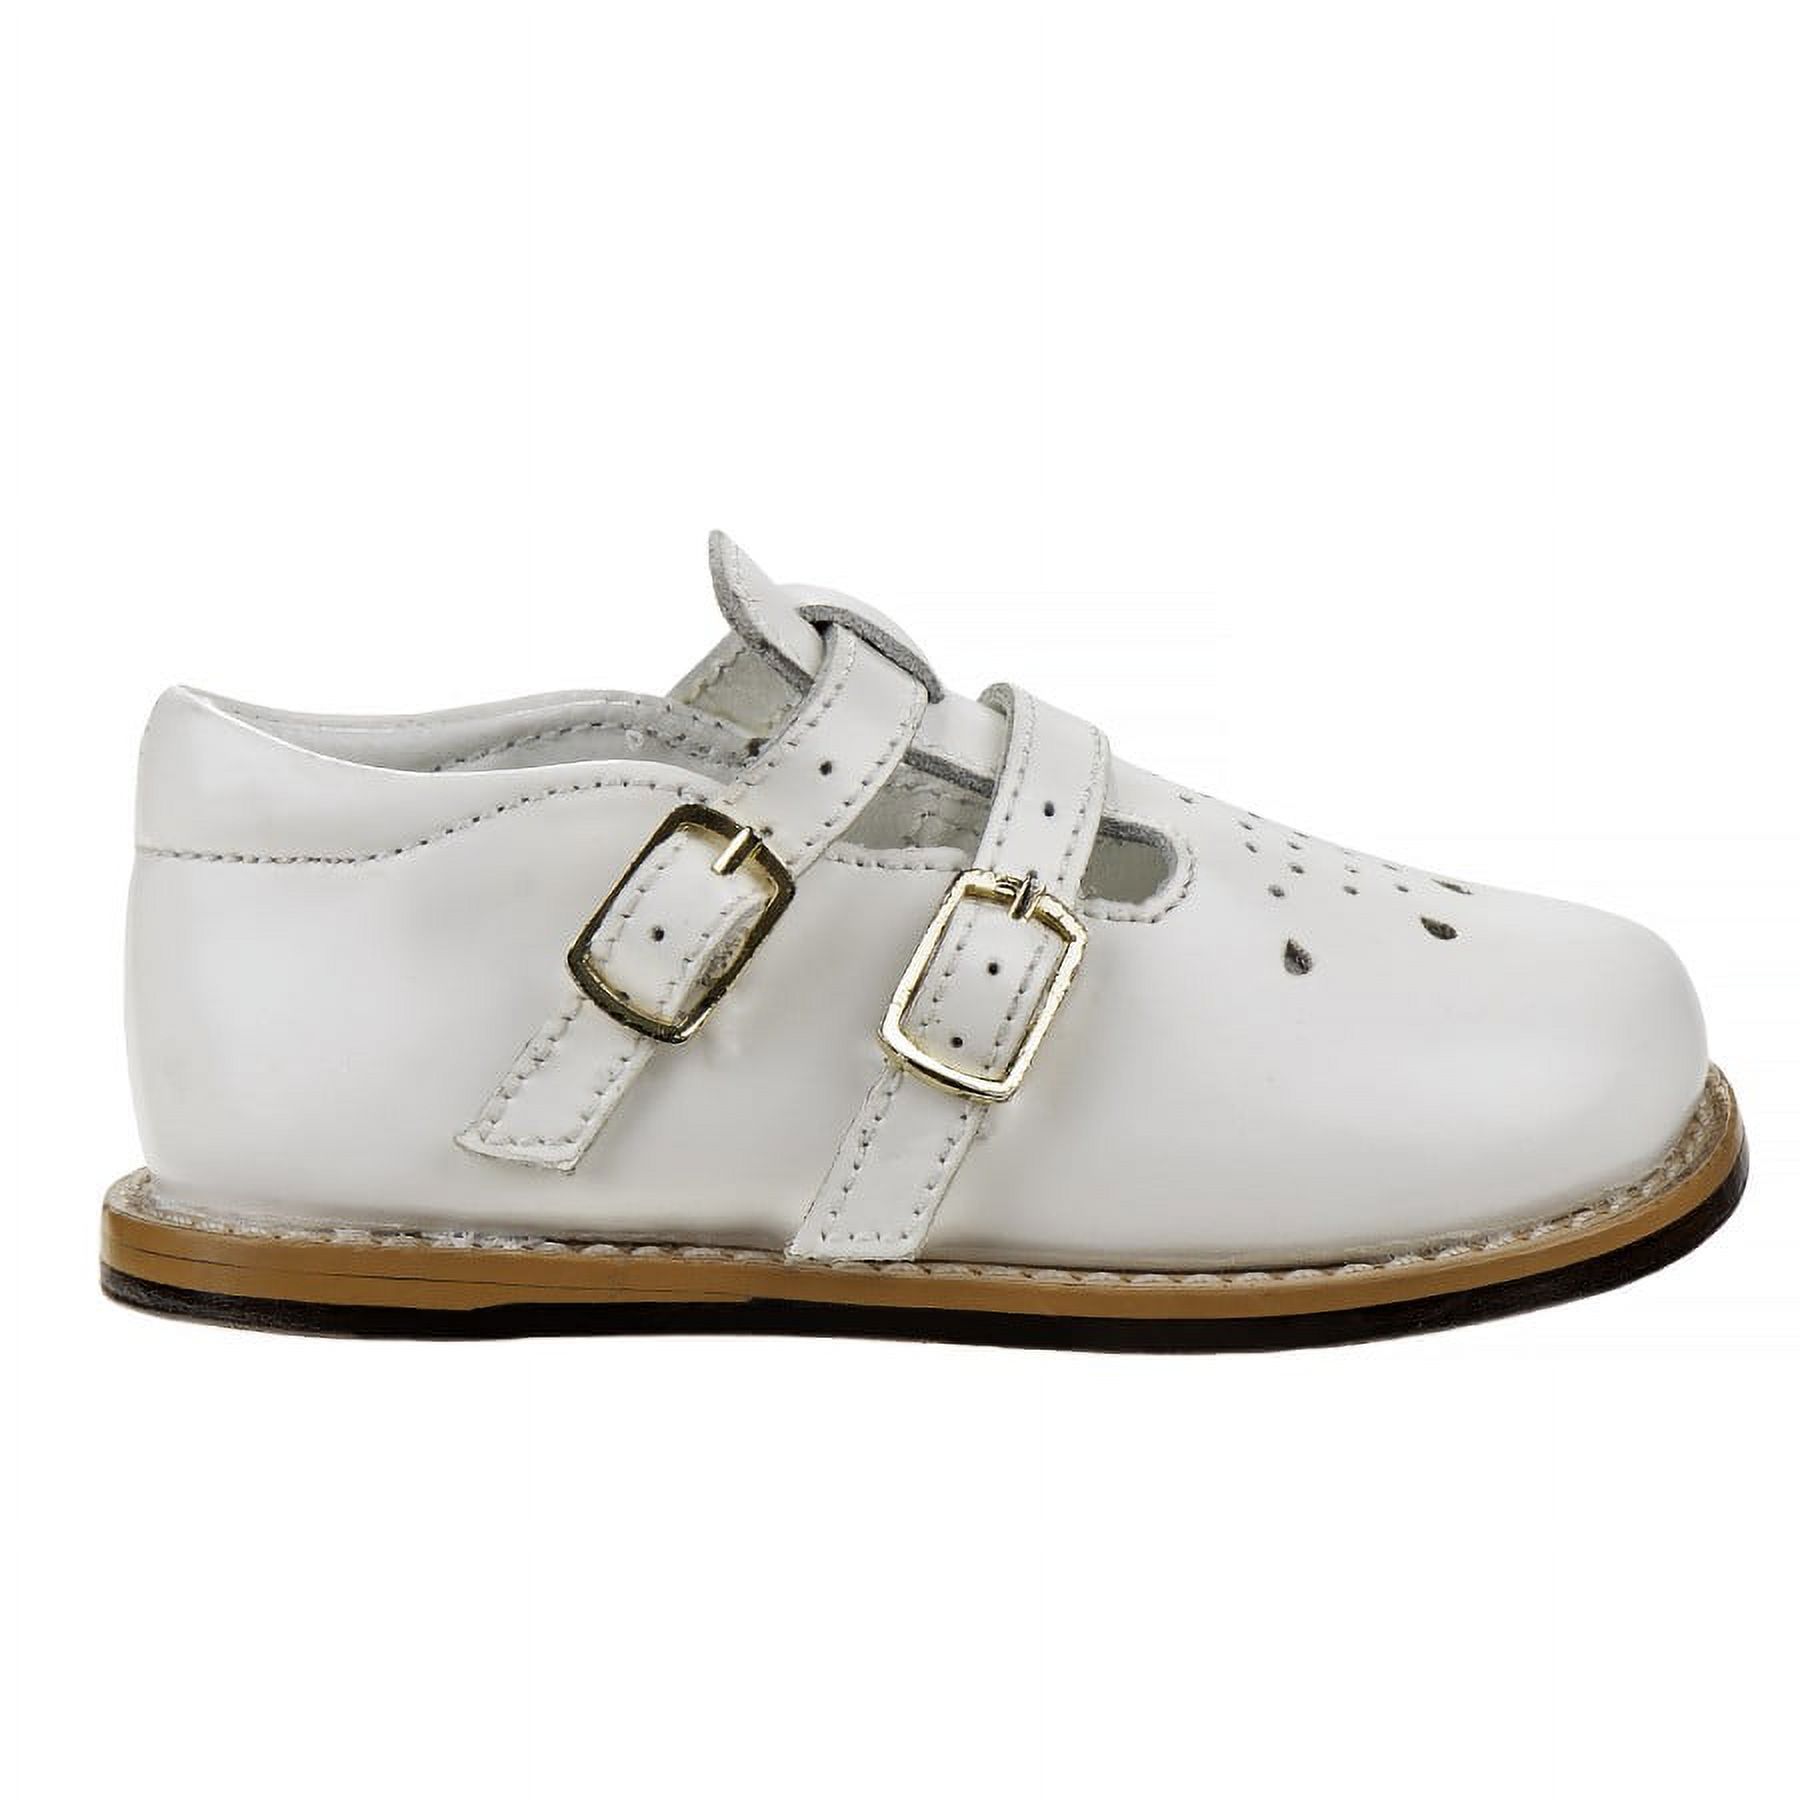 Josmo 8193 Buckle Toddlers' Wide Width Walking Shoes - White, 5.5 - image 2 of 5